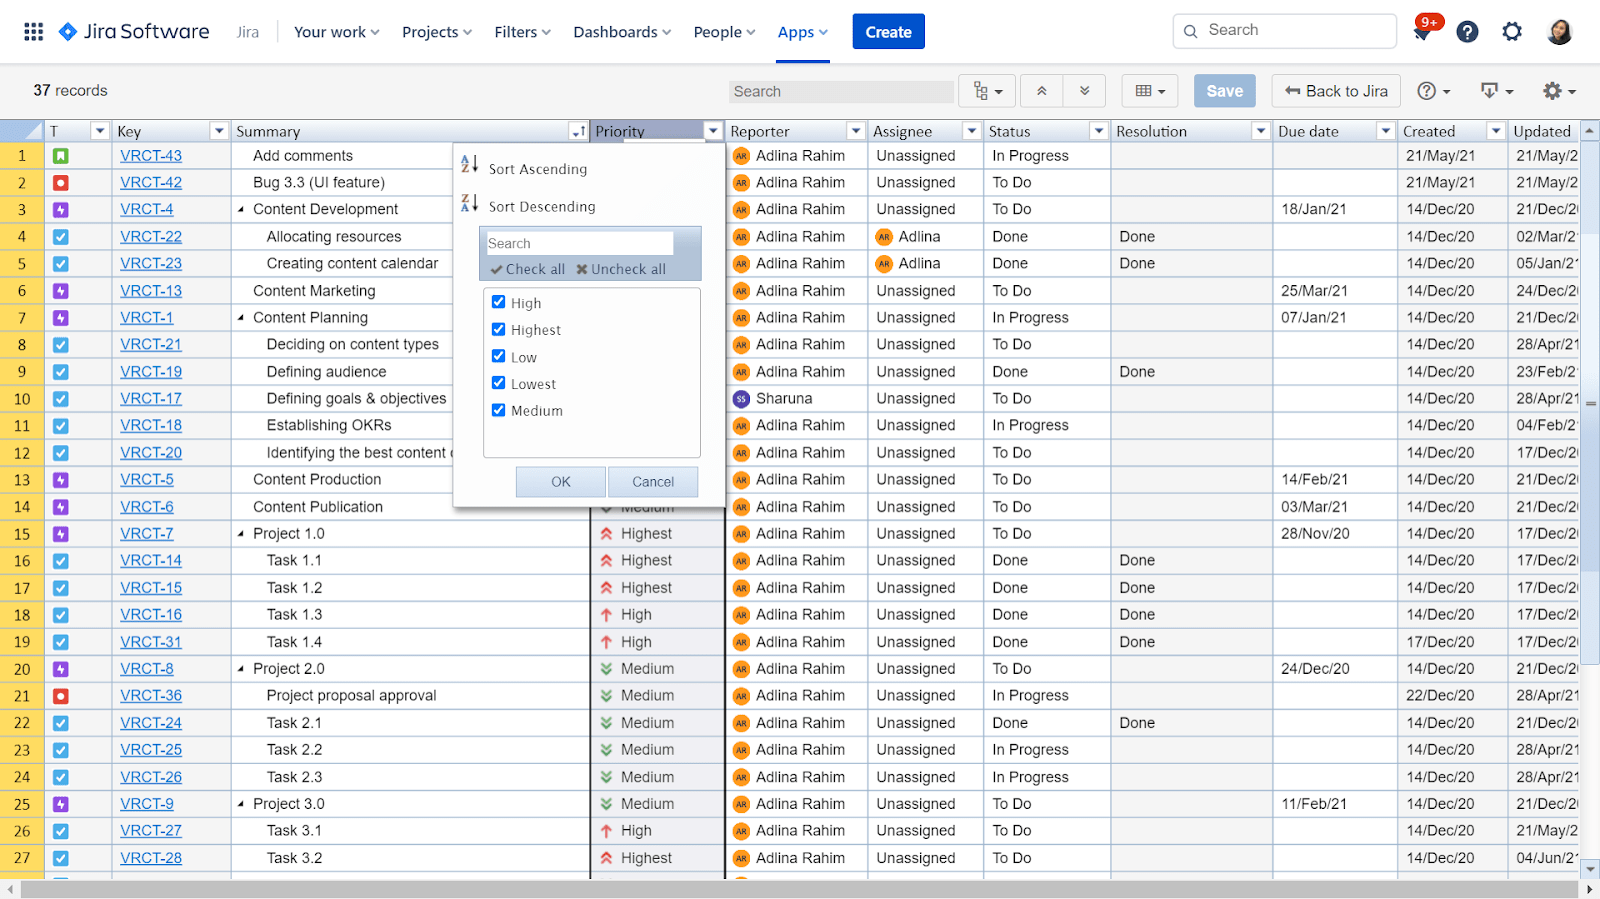 Excel-like Issue Editor for Jira